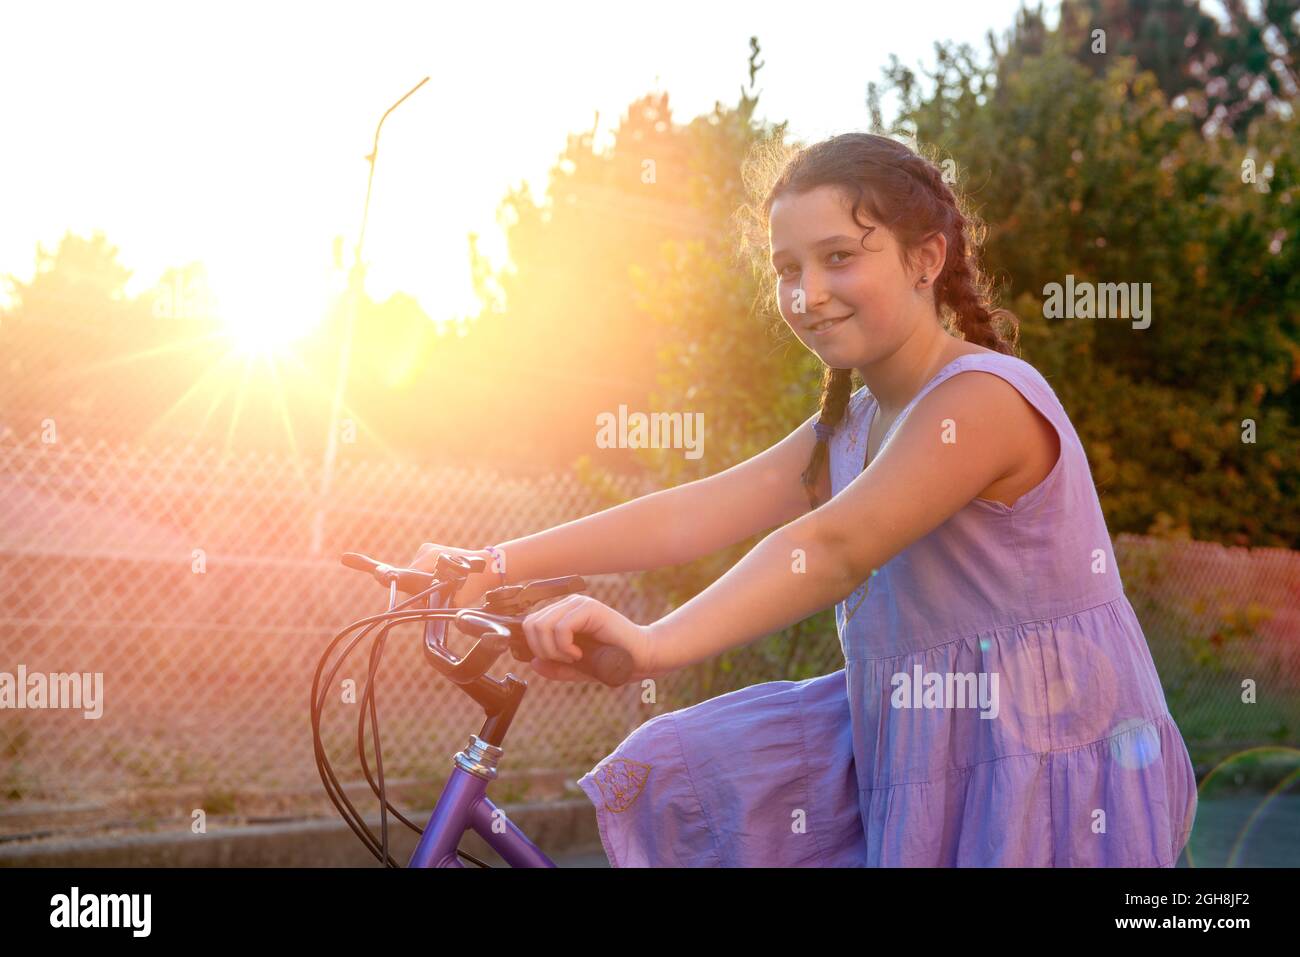 Happy young girl posing in a bicycle outdoors at sunset Stock Photo